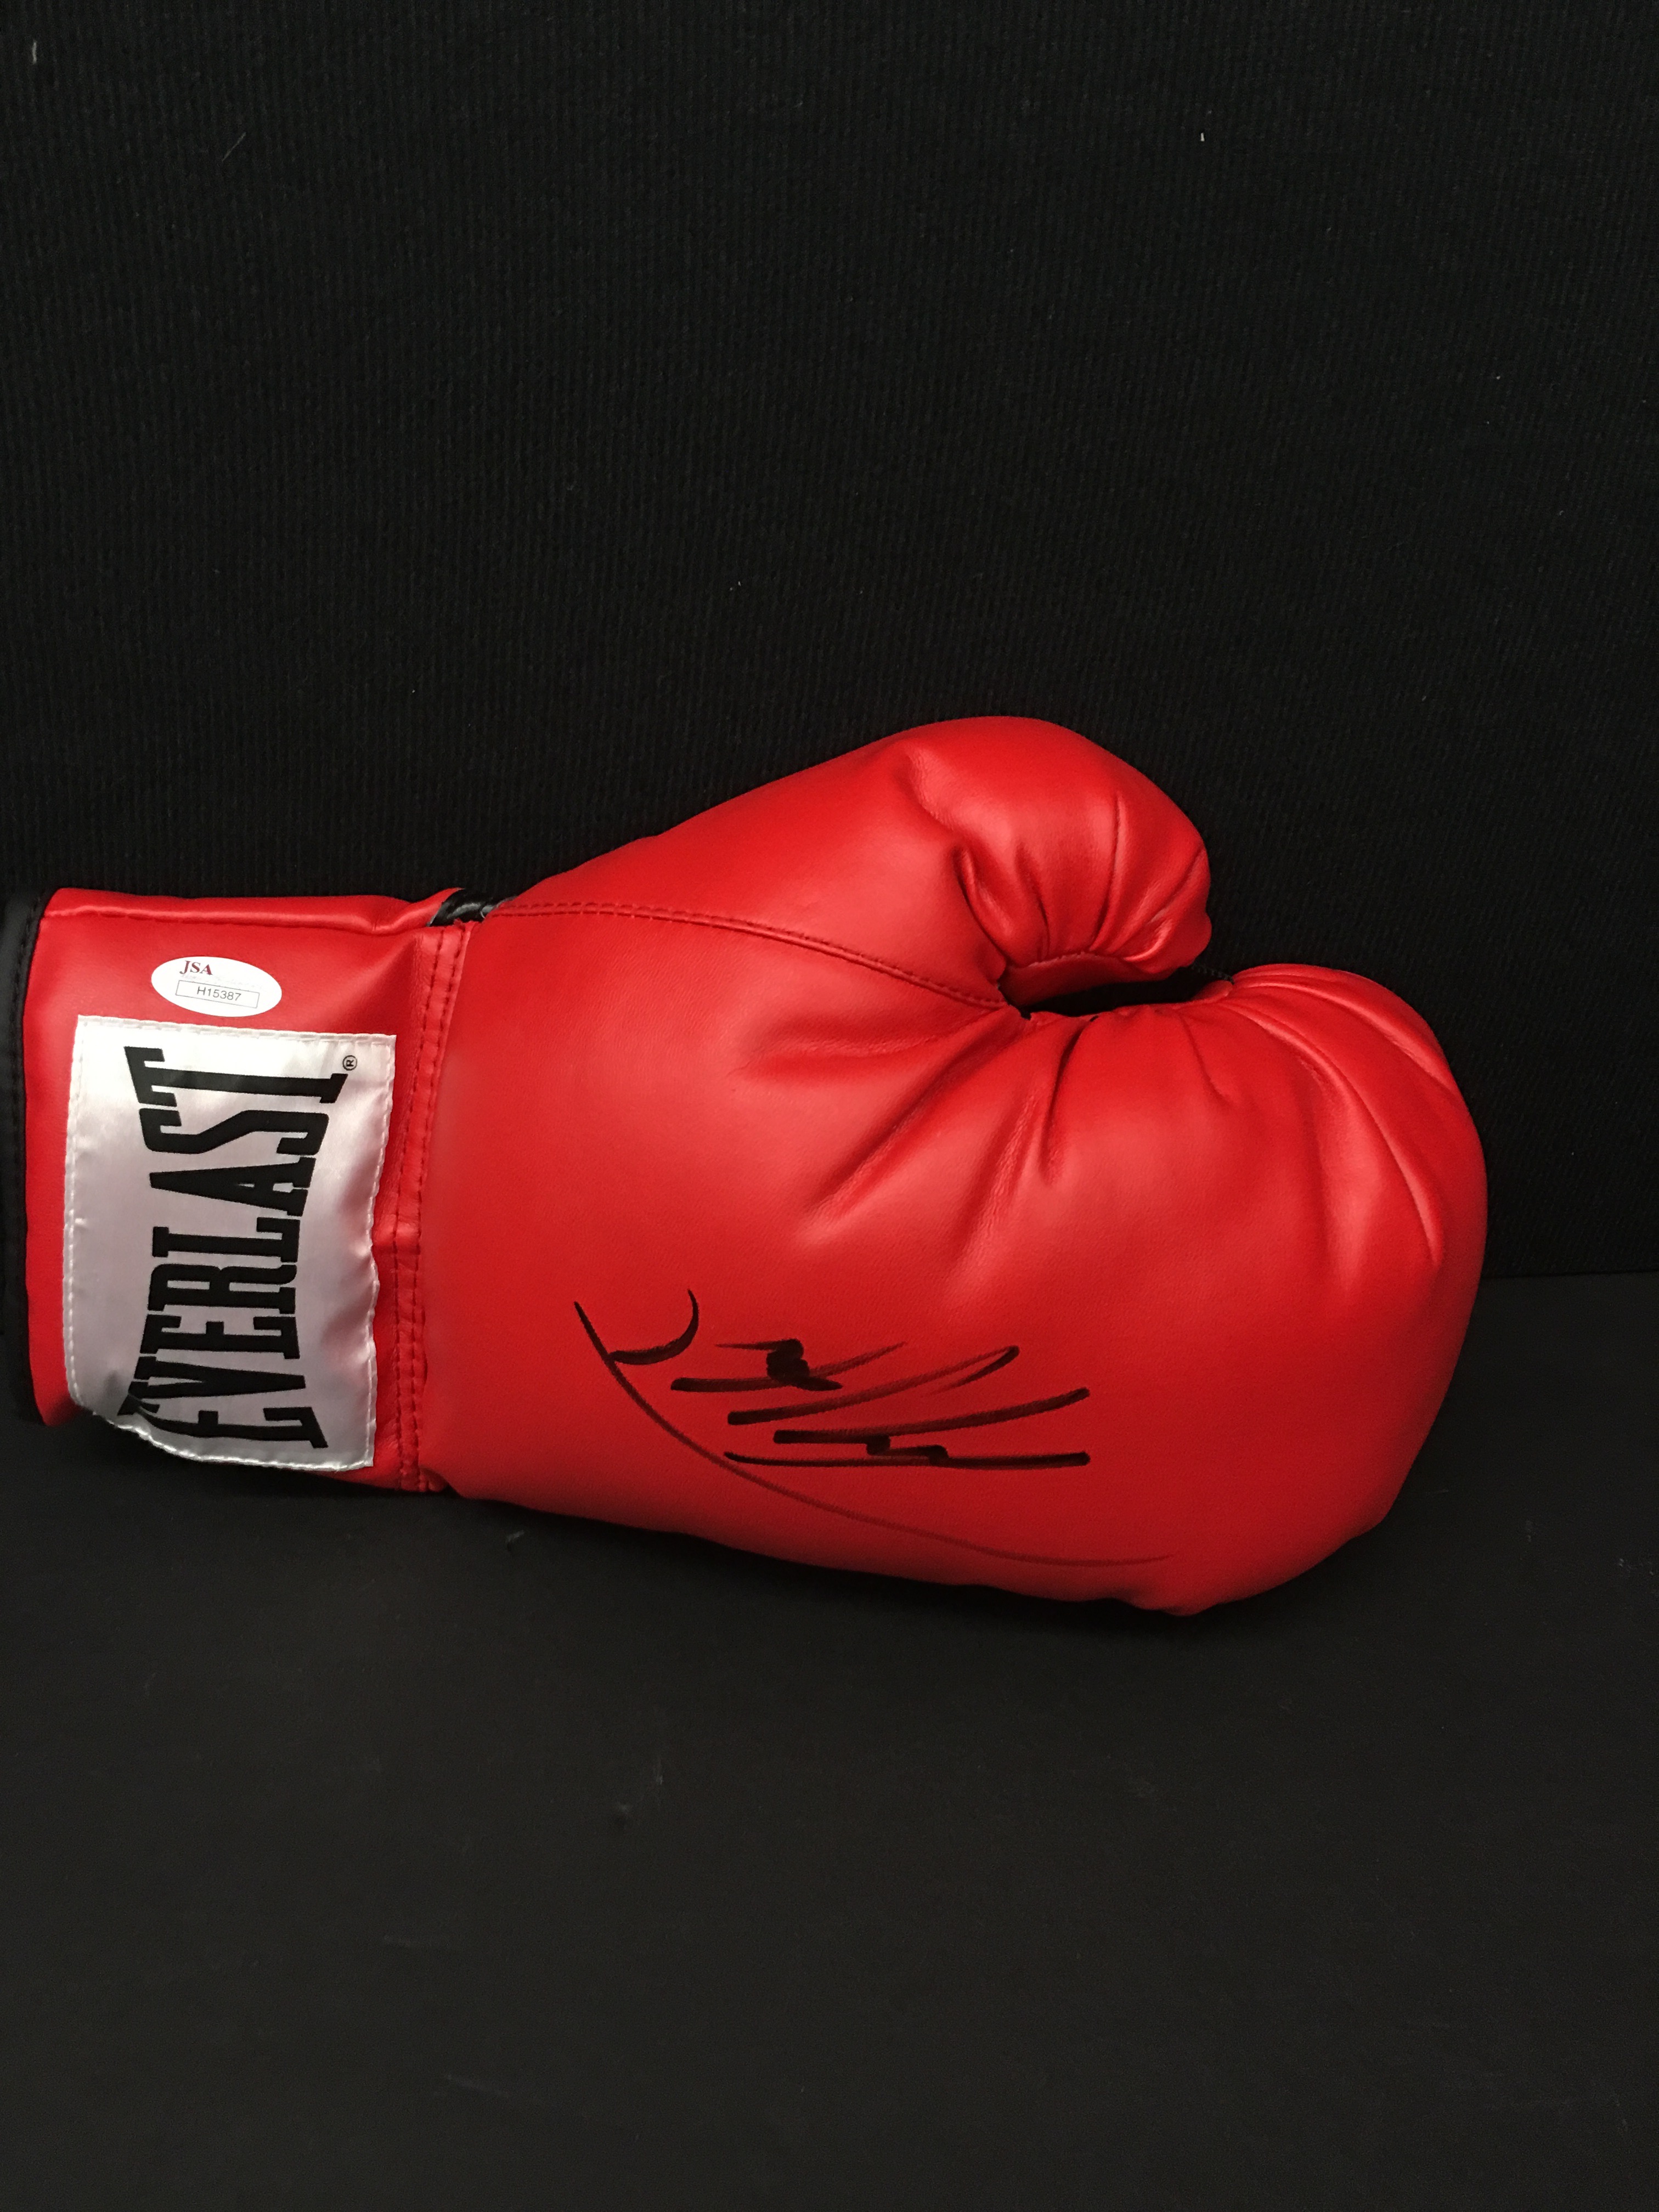 Larry Holmes Autographed boxing Glove